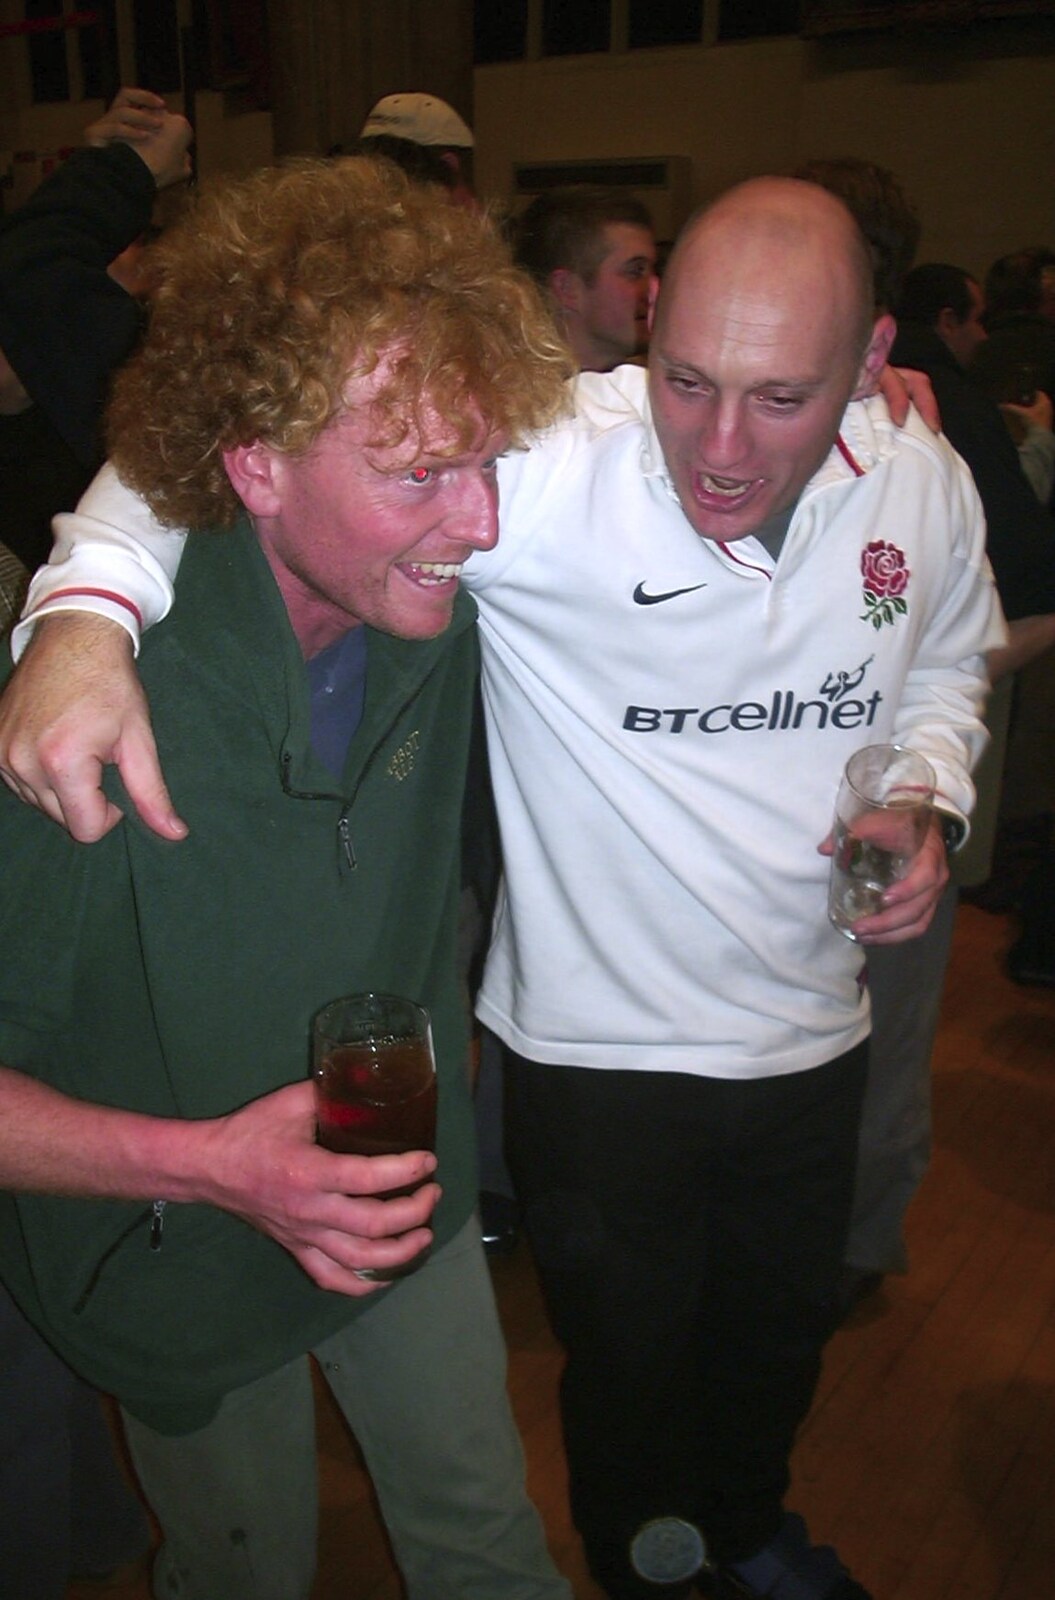 Wavy and Gov dance around from The Brome Swan at the Norwich Beer Festival, St. Andrew's Hall, Norwich - 29th October 2003